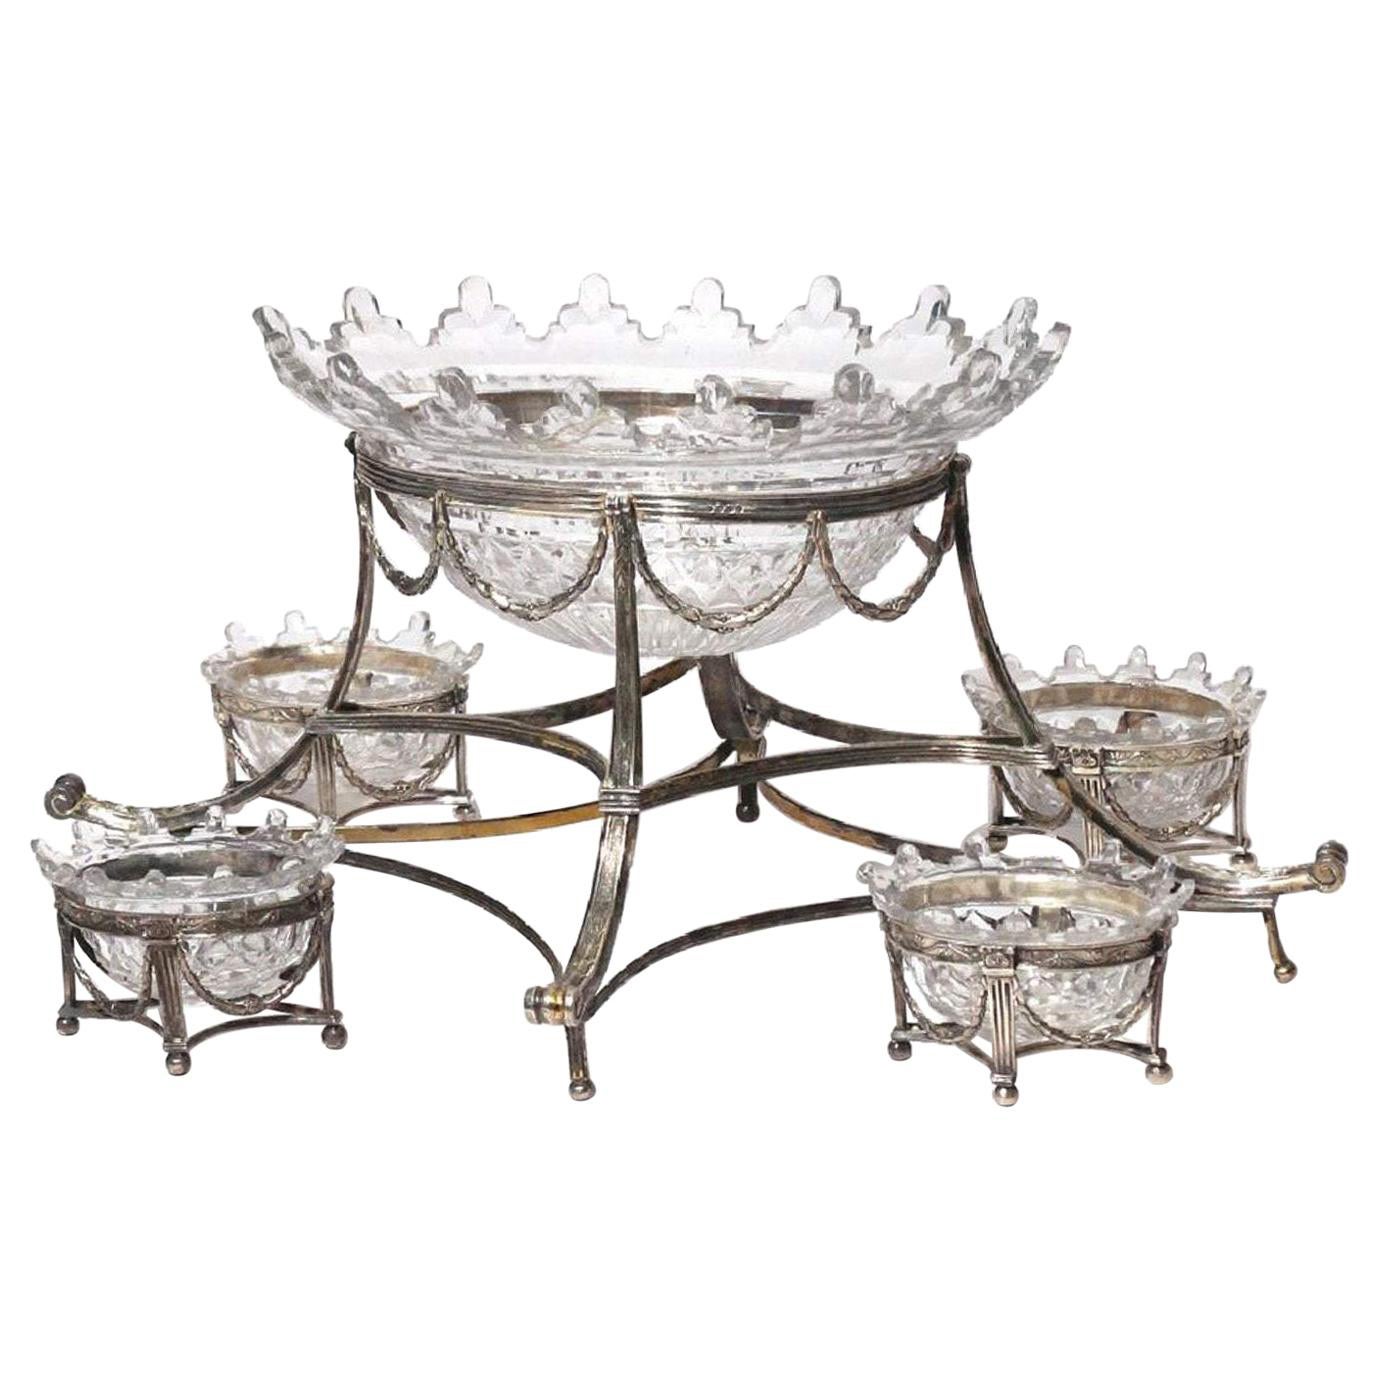 George III 1792 5-Piece Silver and Cut Glass Epergne Centerpiece Bowls